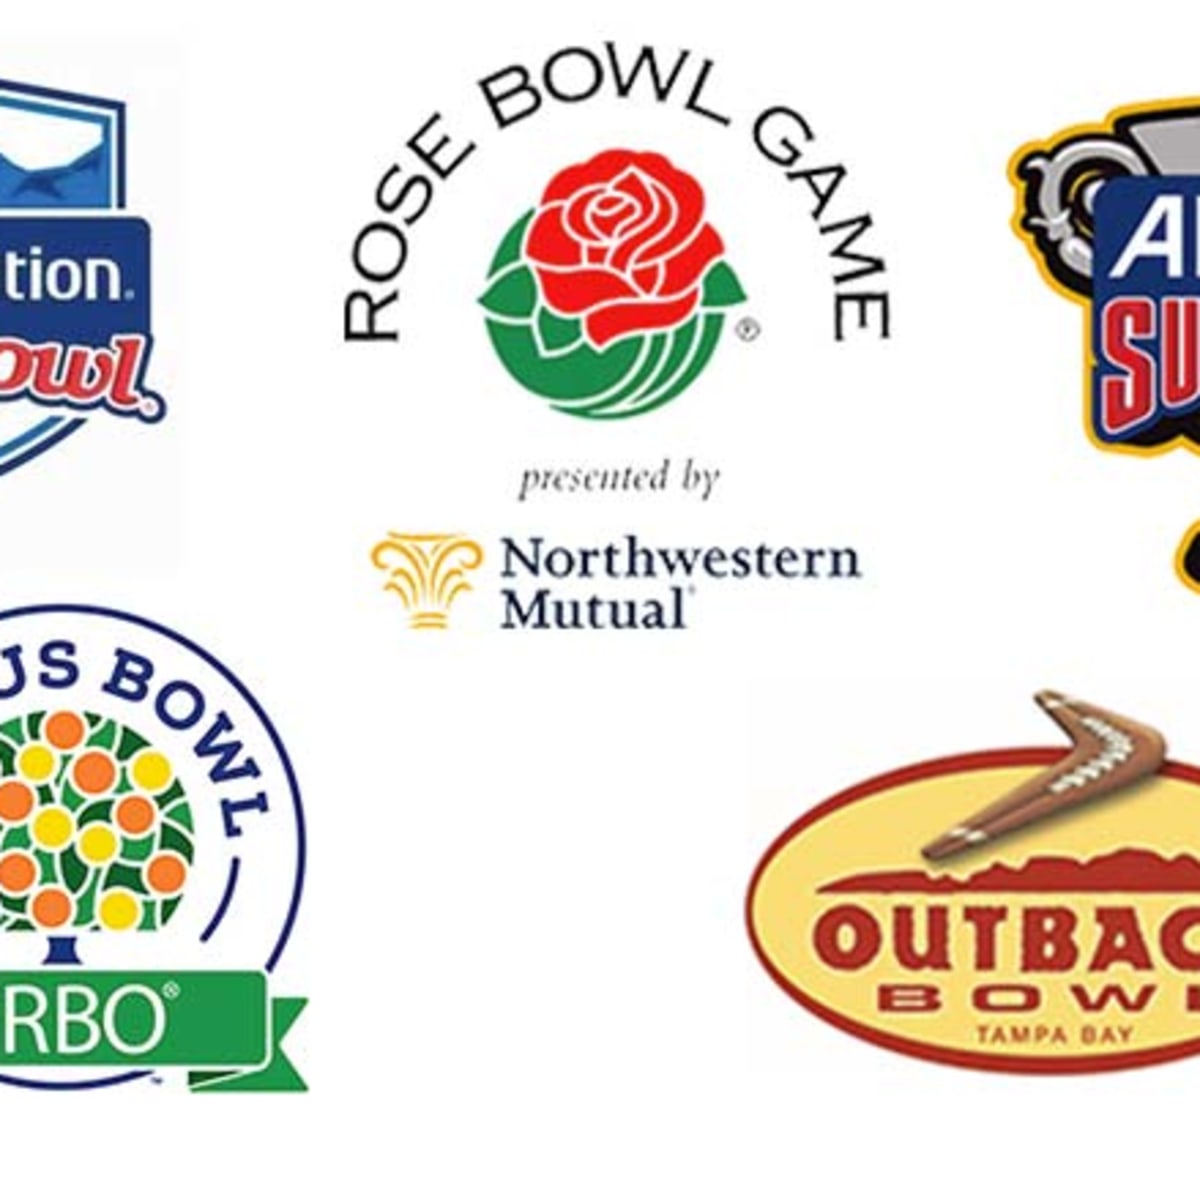 College Football Bowl Games on TV Today (Tuesday, Jan